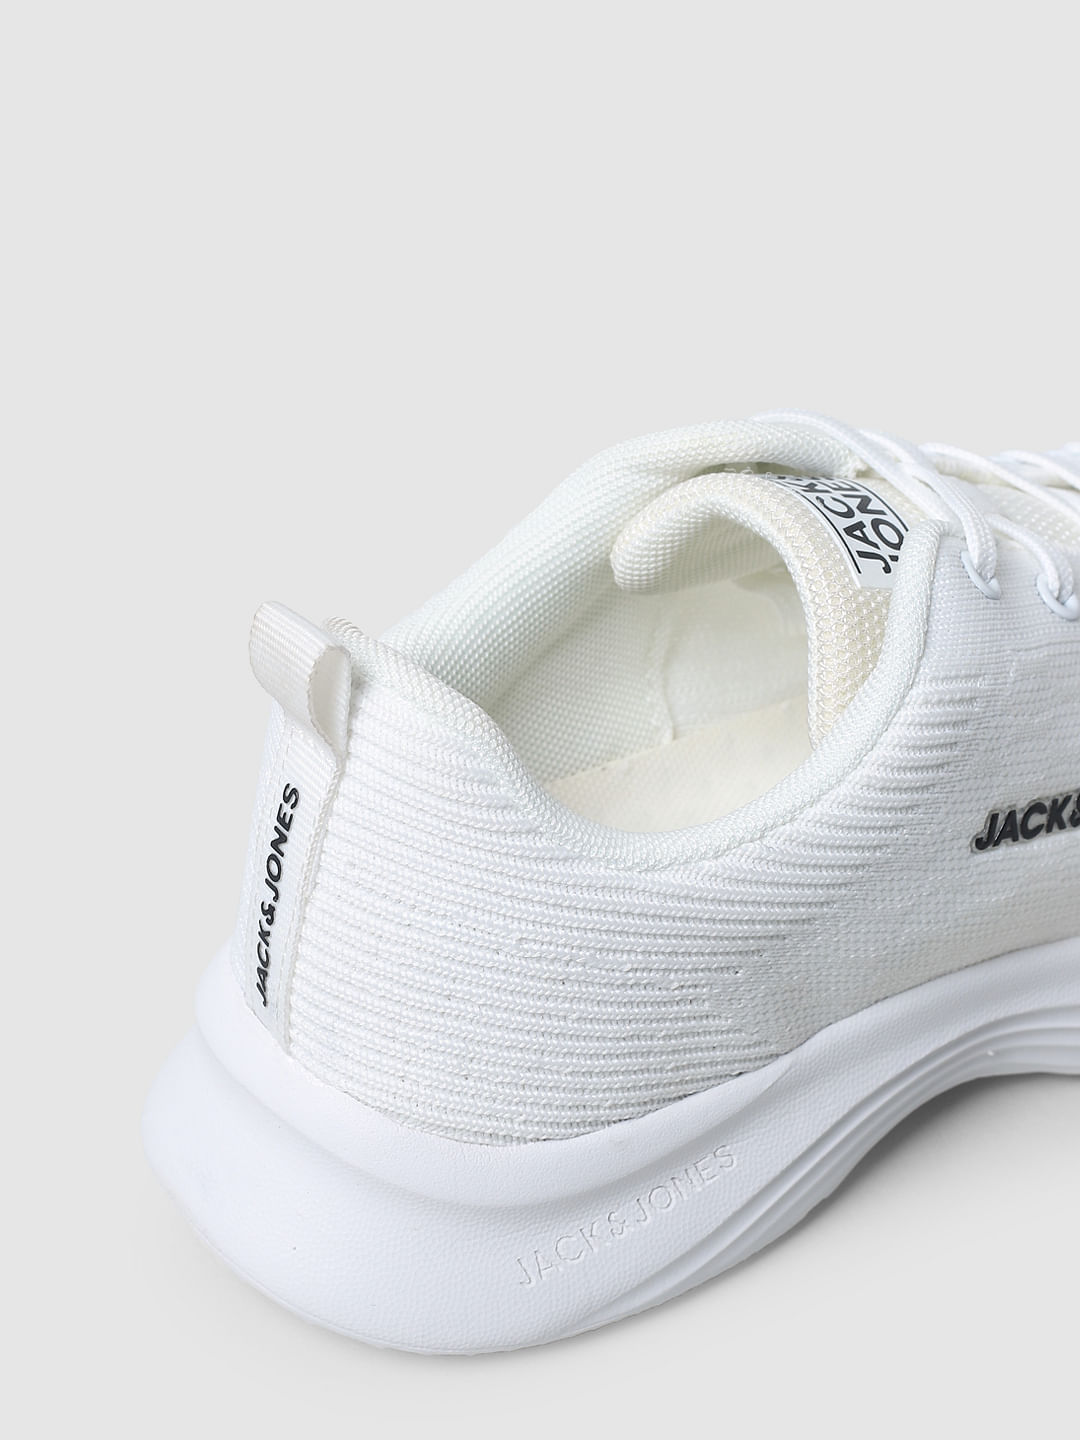 Cryptide 3D Printed Sneakers will leave you feeling like Bigfoot - Yanko  Design